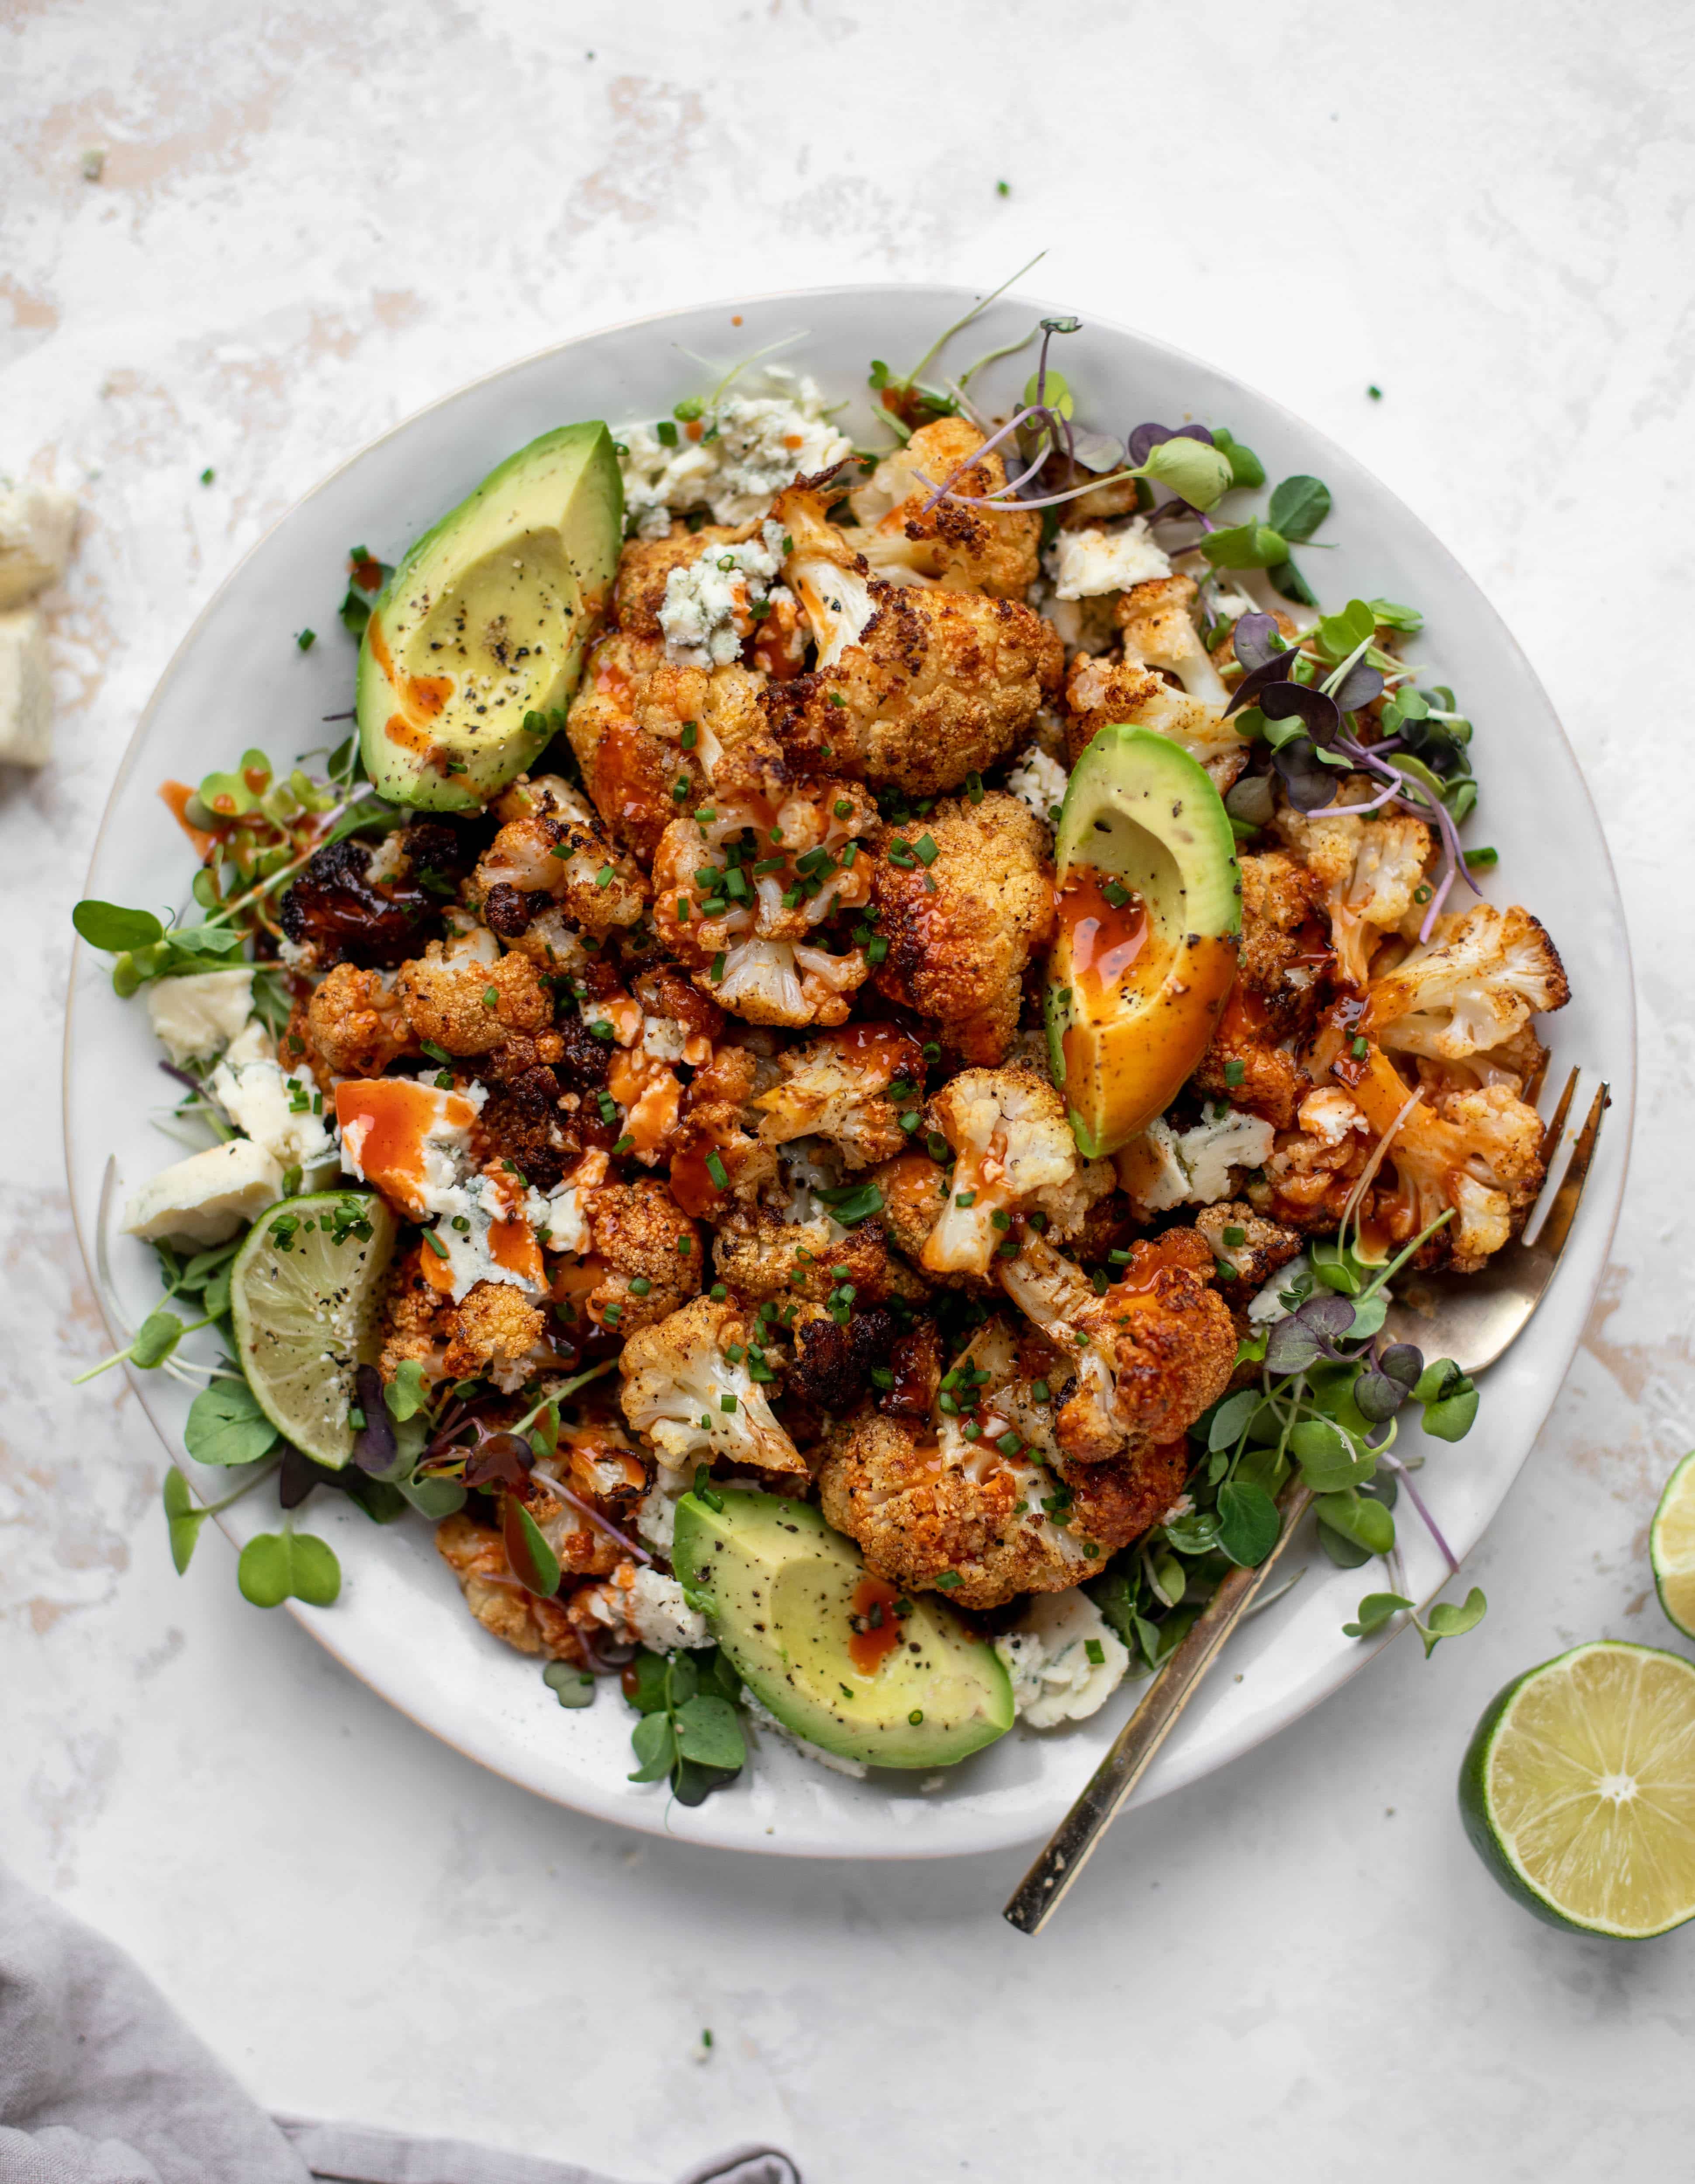 This crispy buffalo cauliflower is loaded with flavor! Serve with avocado and smoked blue cheese - you will want to eat this everyday!